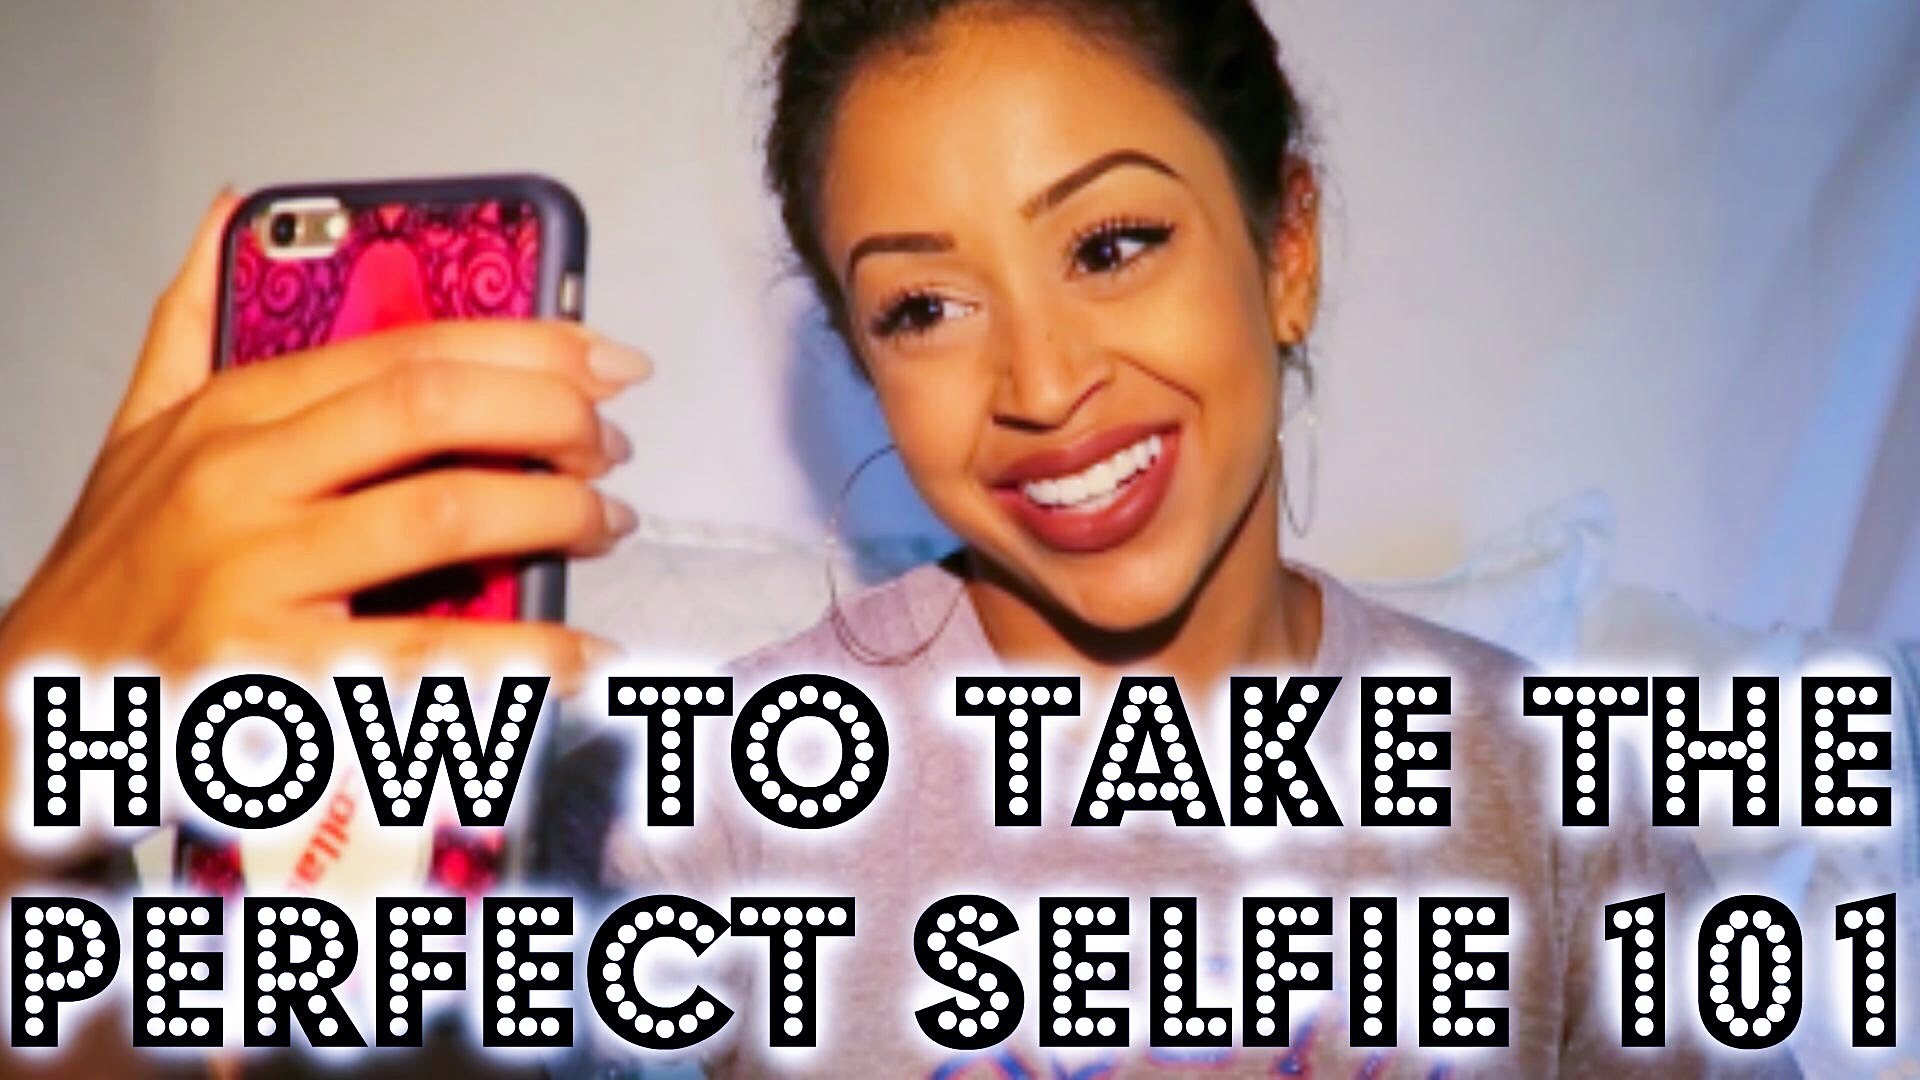 How to take the Perfect Selfie 101 | The Learning Zone